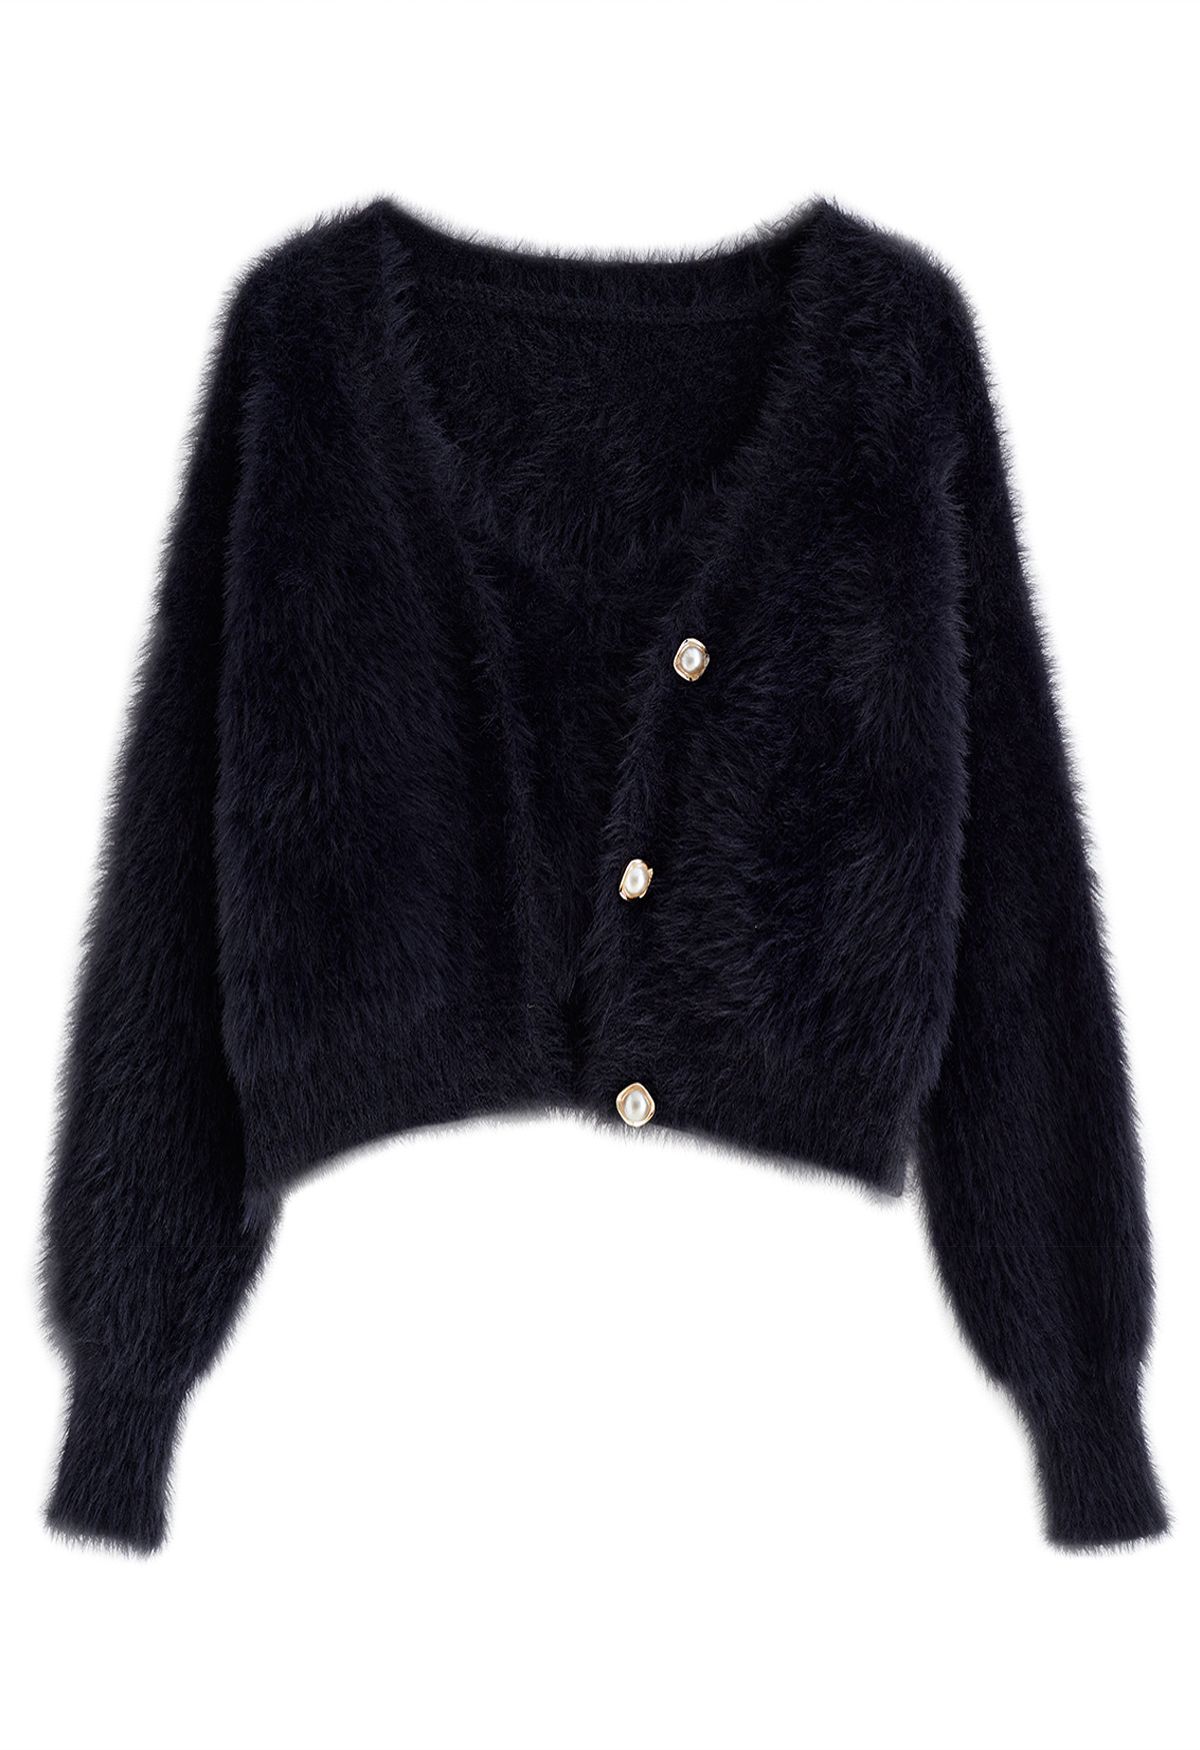 Fuzzy Cami Top and Pearly Buttoned Cardigan Set in Black